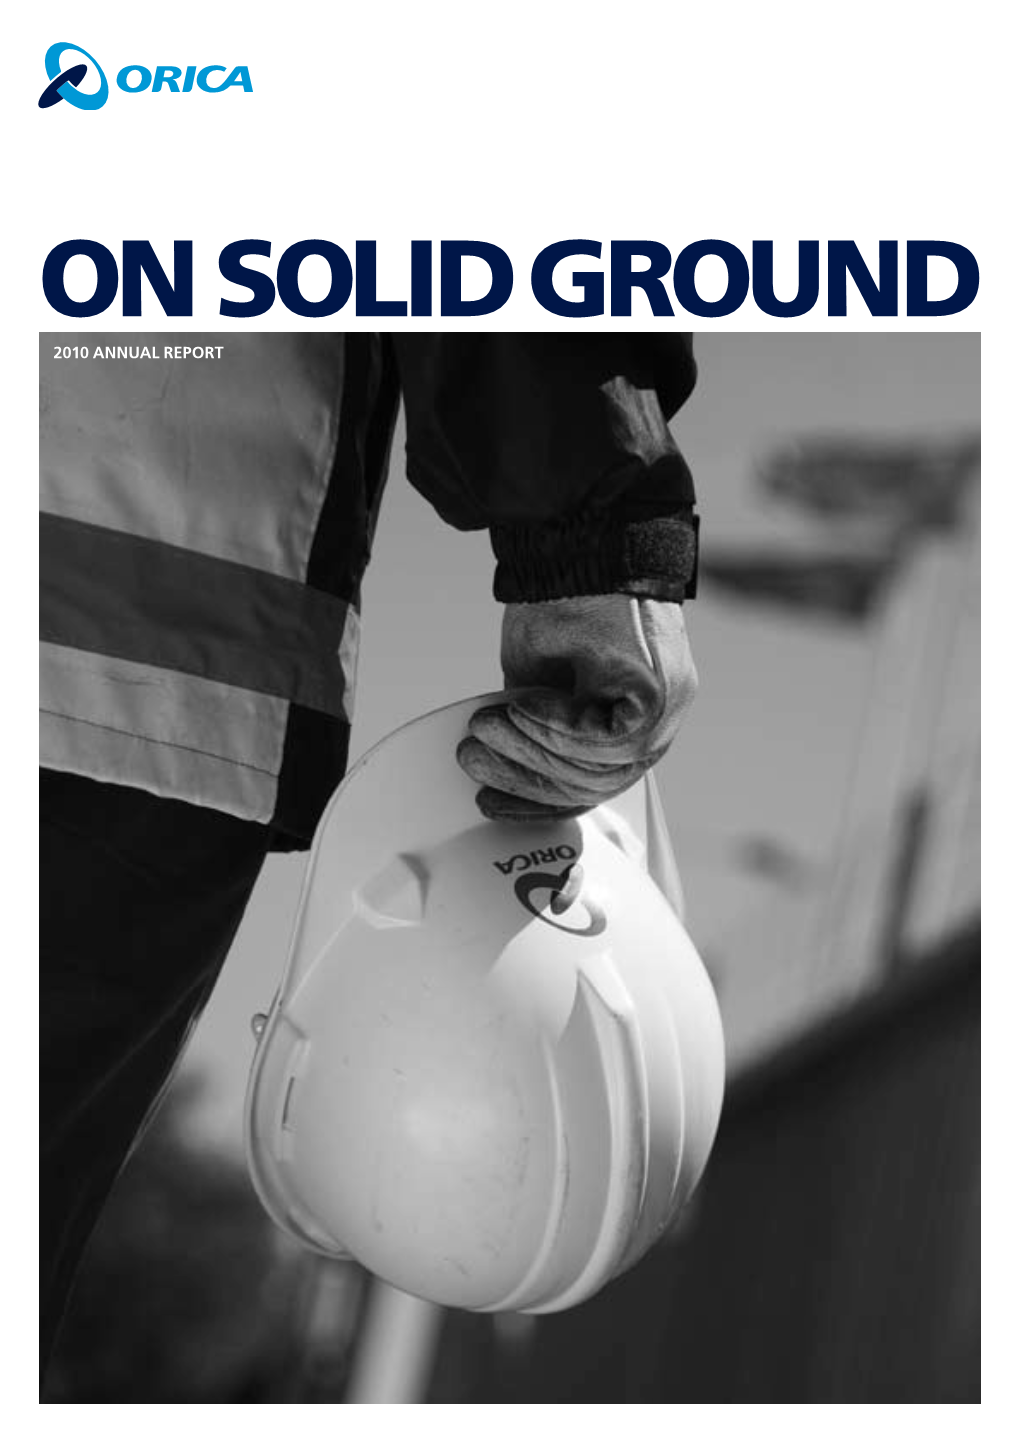 On SOLID GROUND 2010 Annual Report Contents